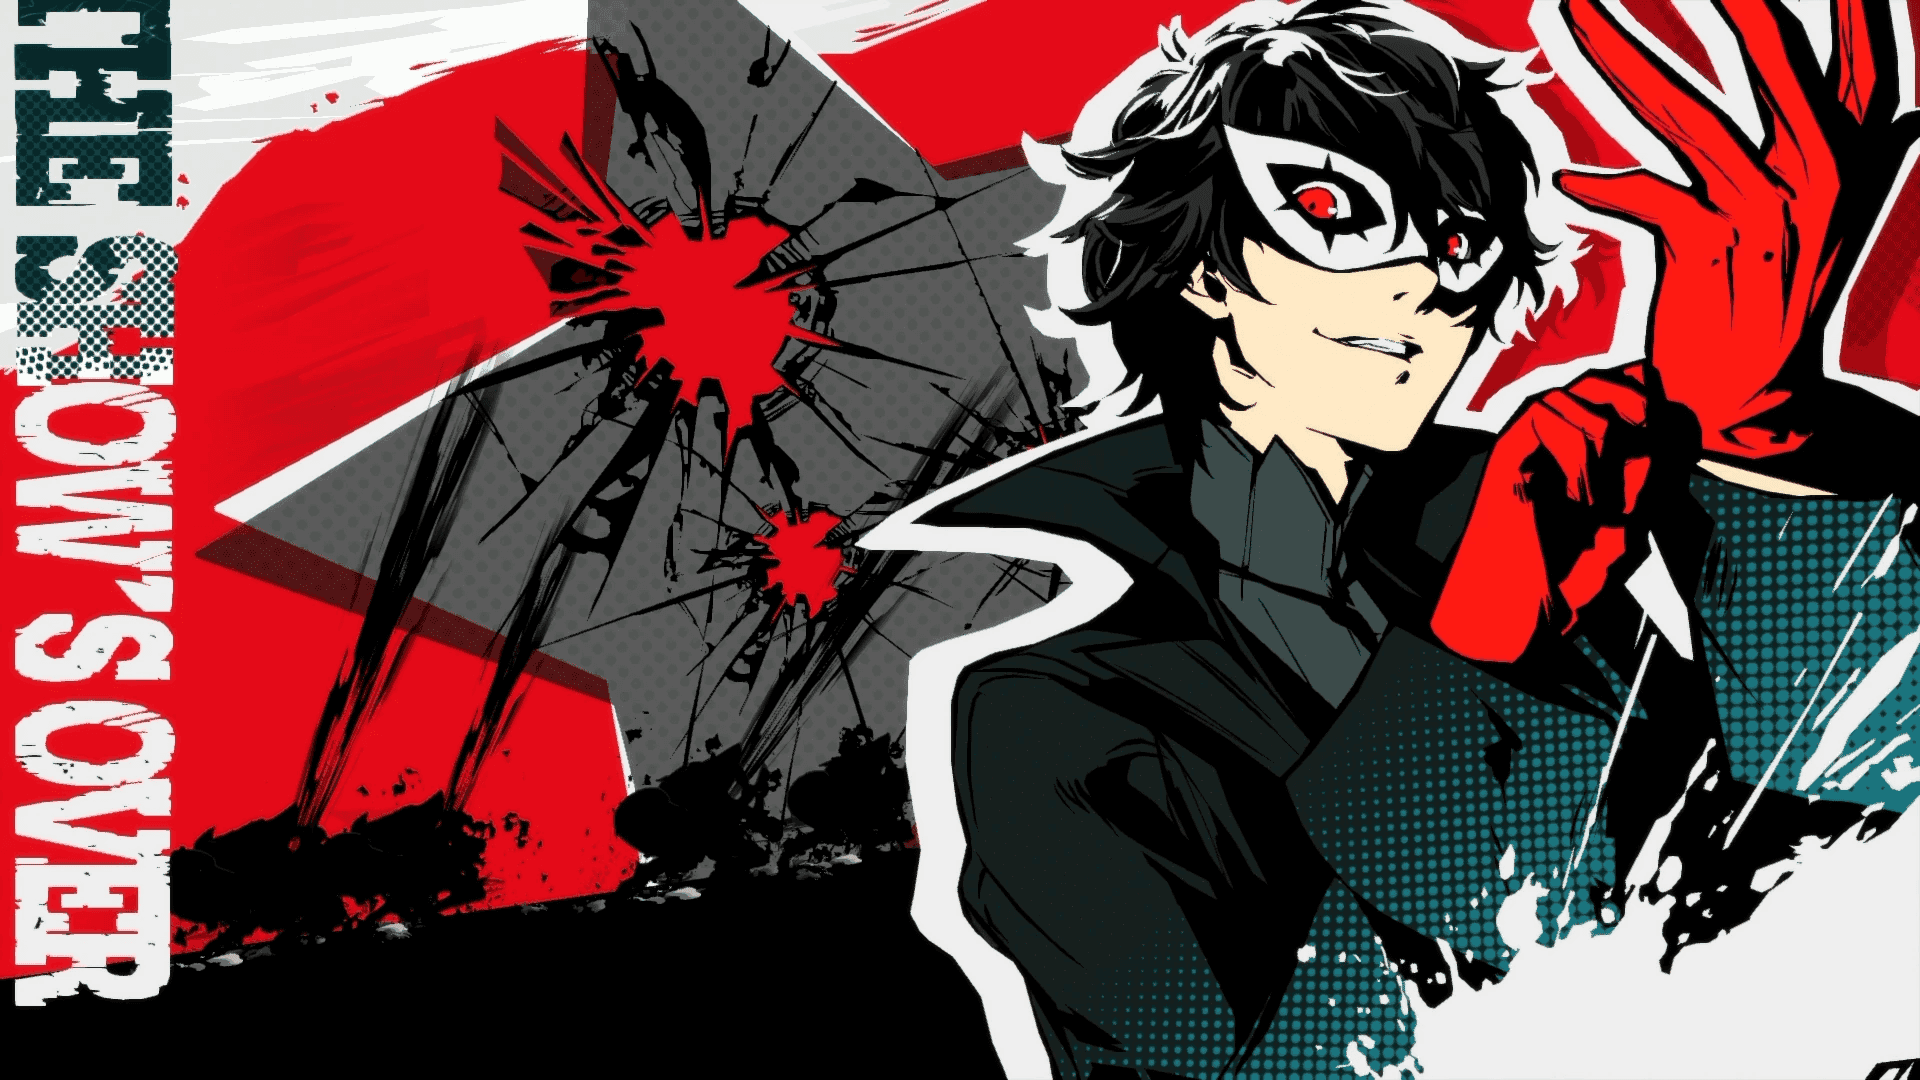 Follow your heart and live your destiny with Persona 5